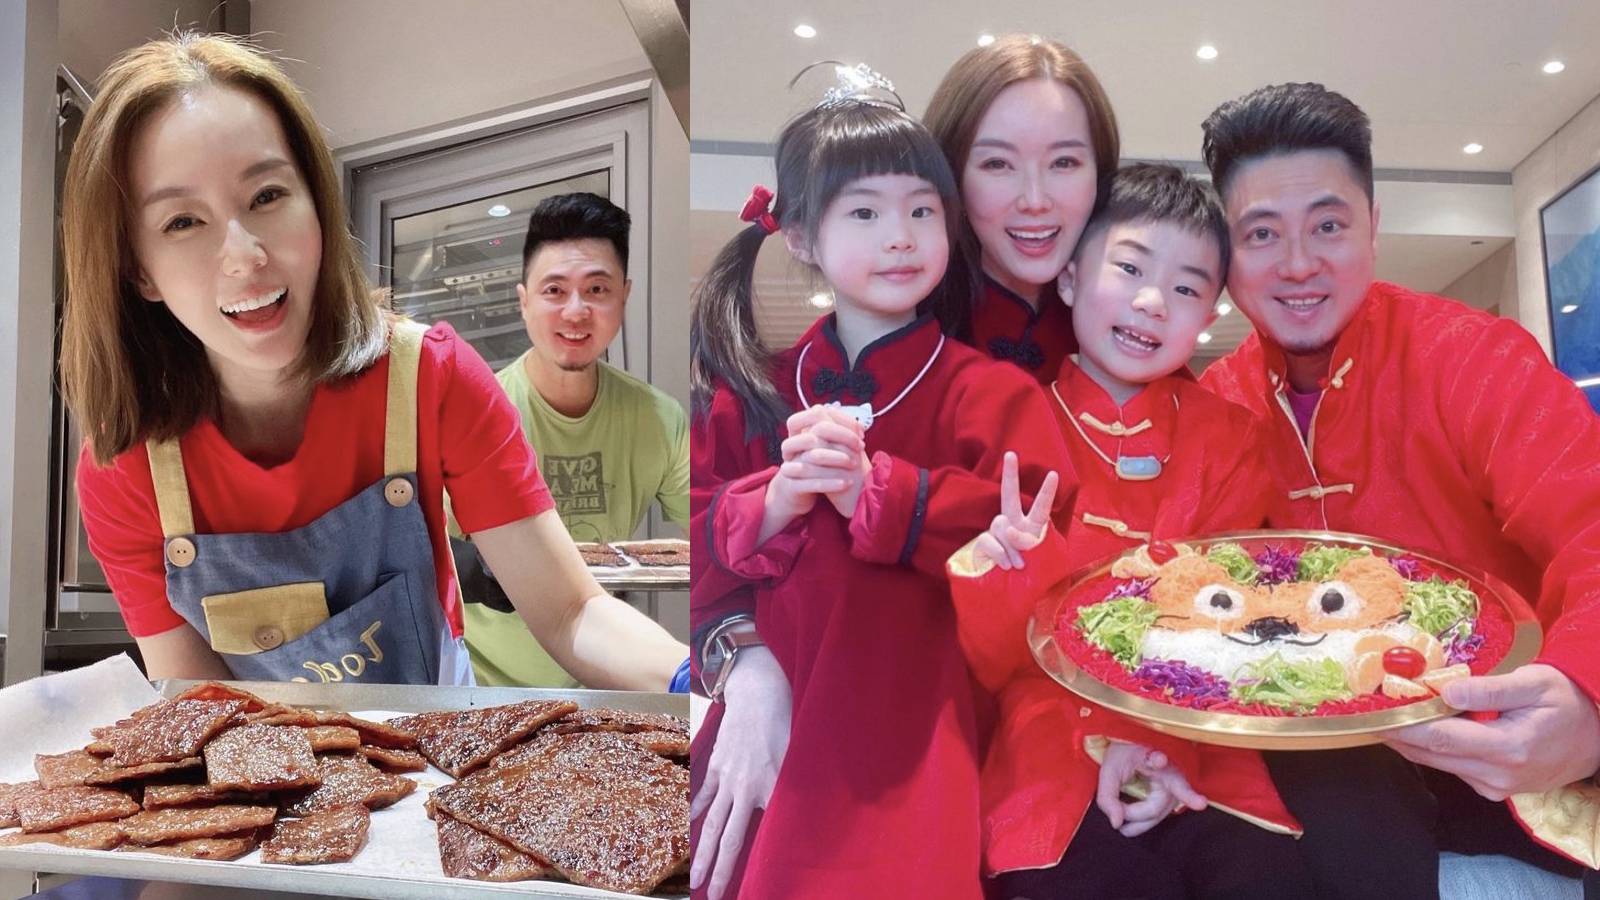 Yvonne Lim and her family got busy in the kitchen prepping for CNY